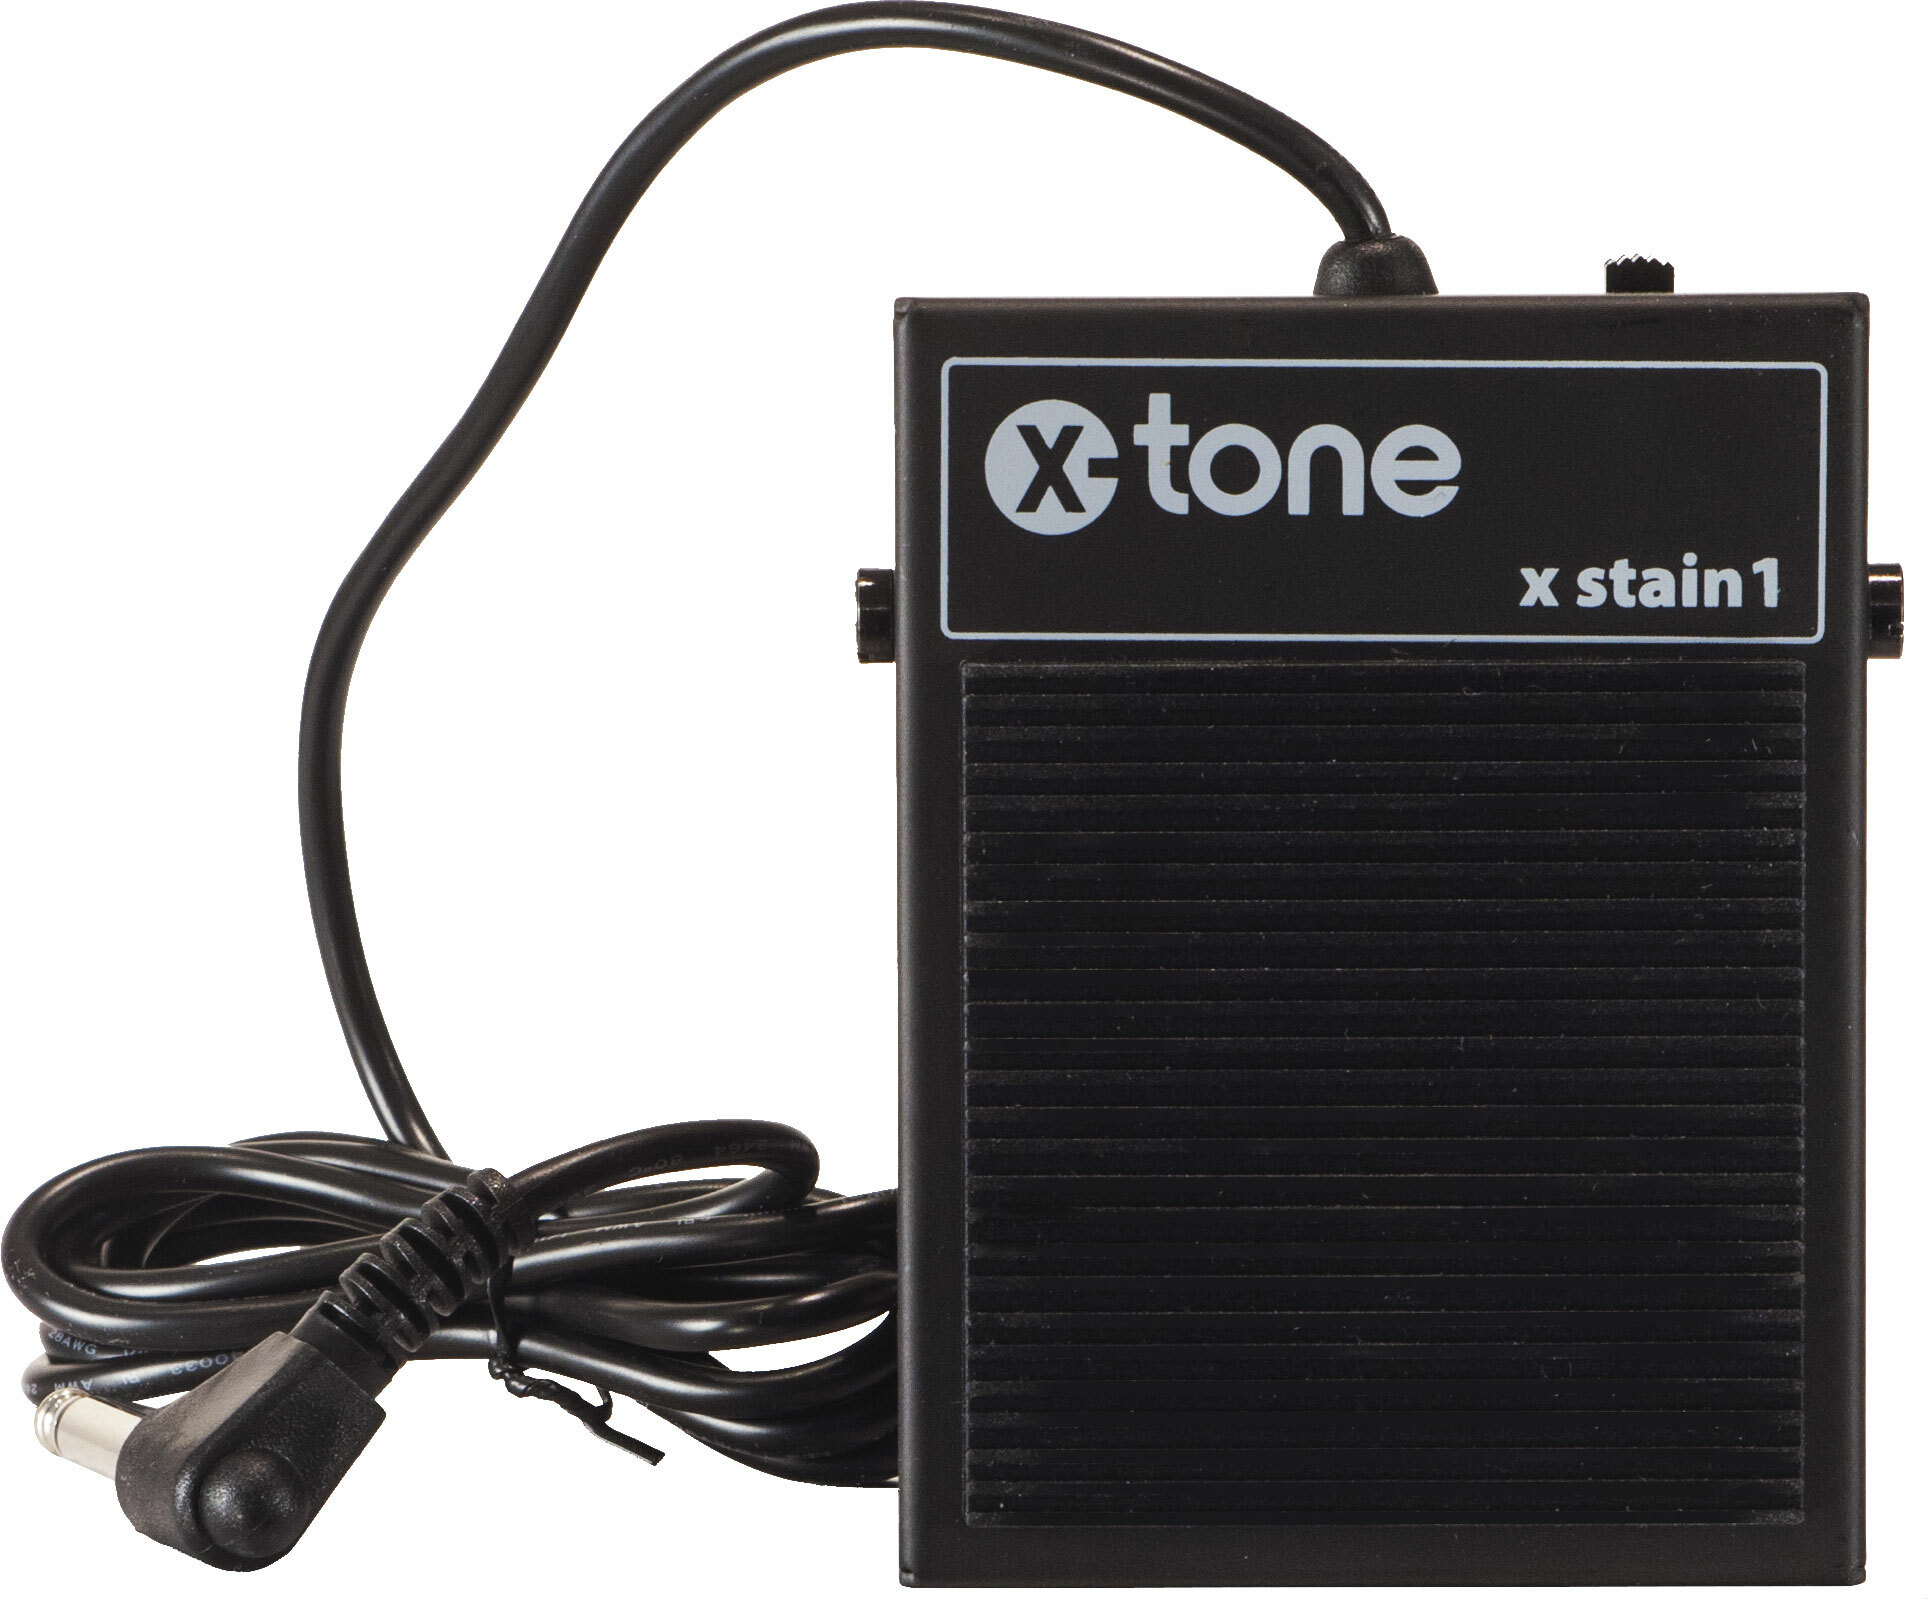 X-tone X-stain 1 Pedale Sustain - Sustainpedaal voor keyboard - Main picture